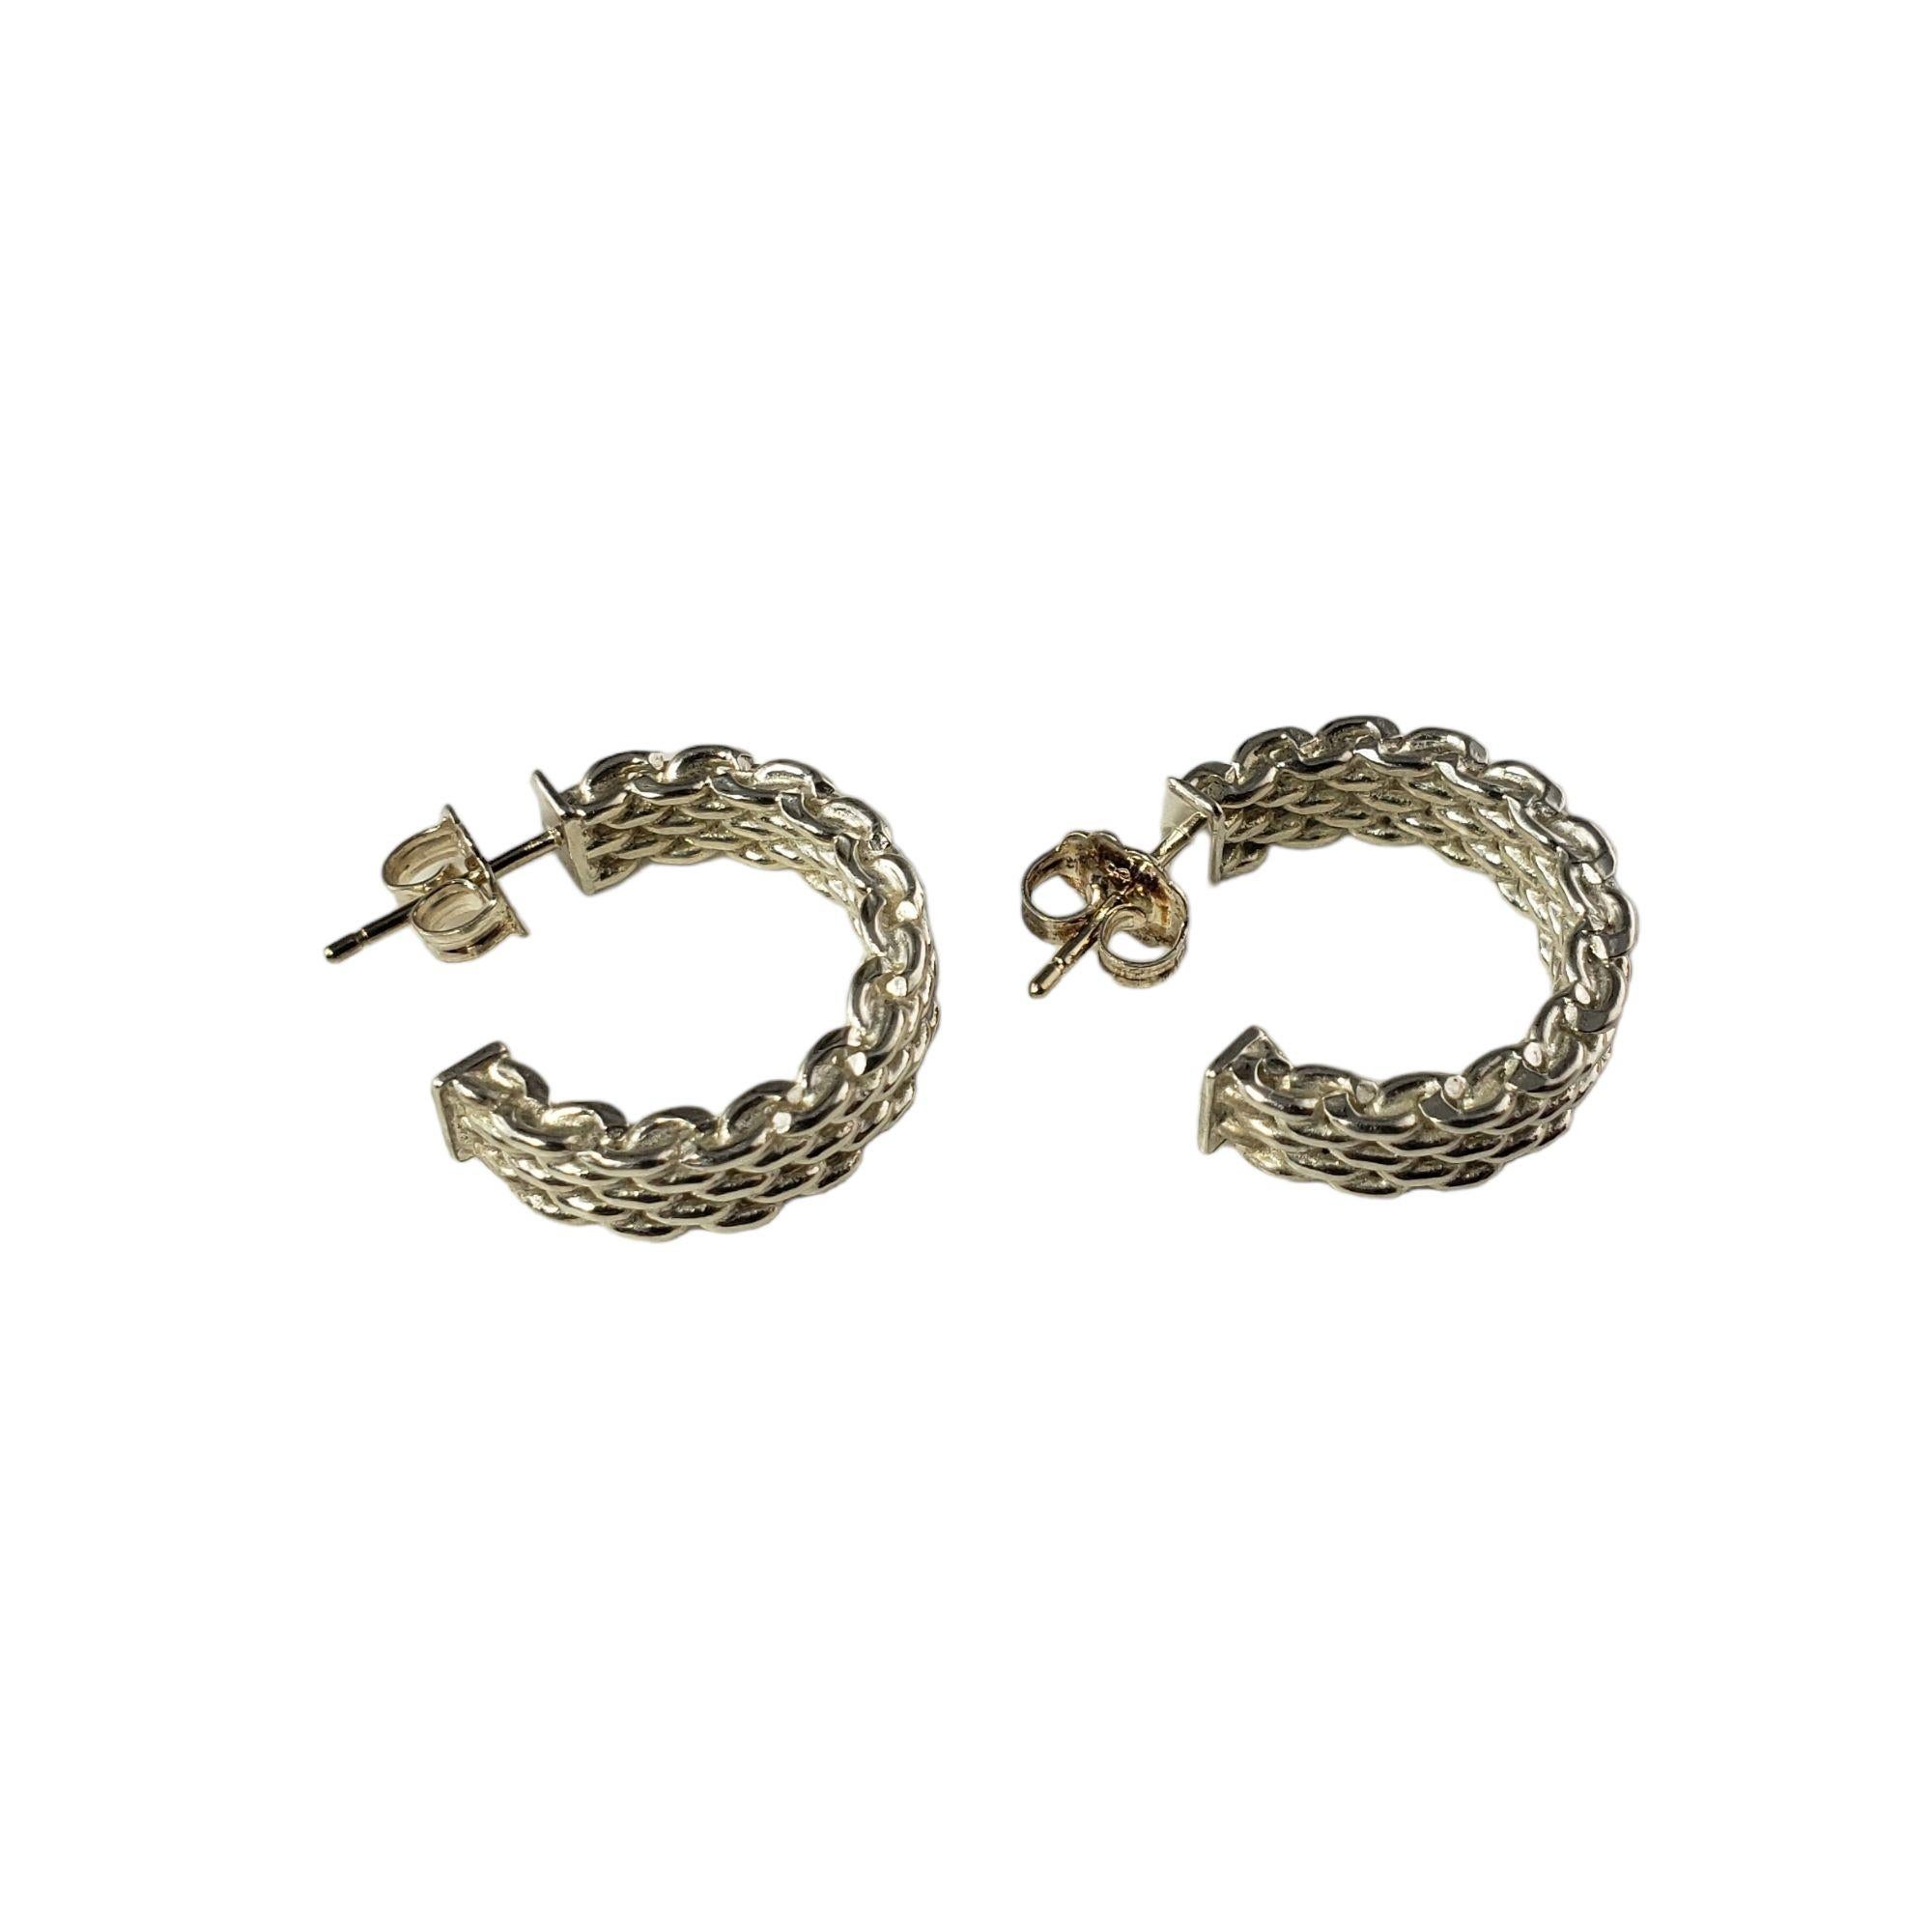 Vintage Tiffany & Co. Sterling Silver Somerset Mesh Hoop Earrings-

These elegant mesh earrings by Tiffany & Co. are crafted in beautifully detailed sterling silver.

*Earring backs are not Tiffany.

Size: 18 mm x 5 mm

Weight: 5.6 gr./ 3.6